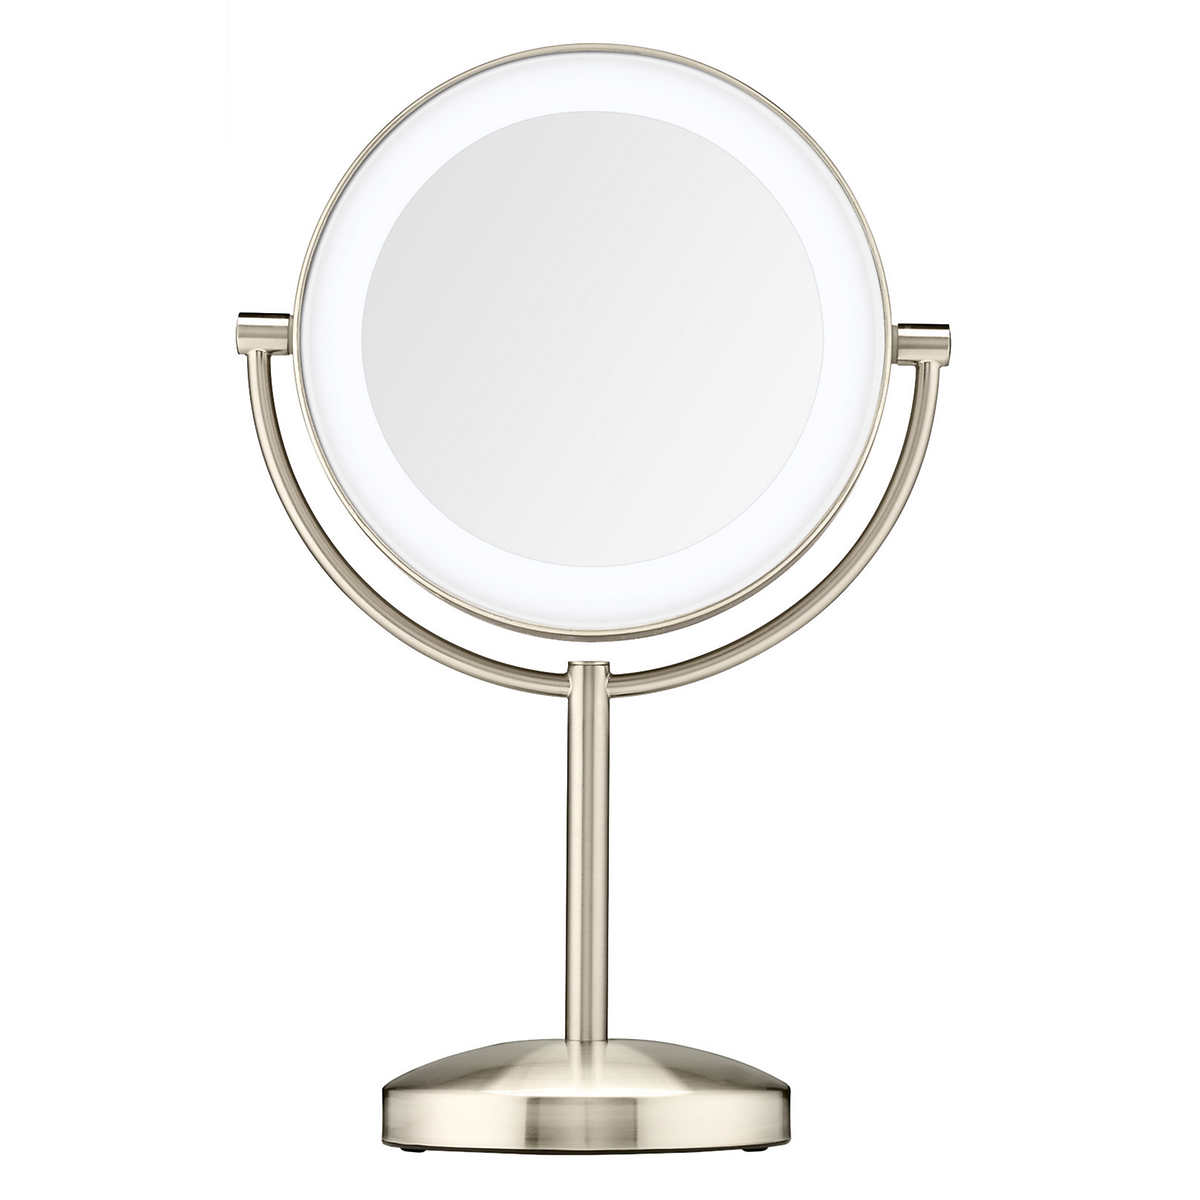 Reflections Led Lighted Mirror By, 10x Magnifying Make Up Mirror With Light